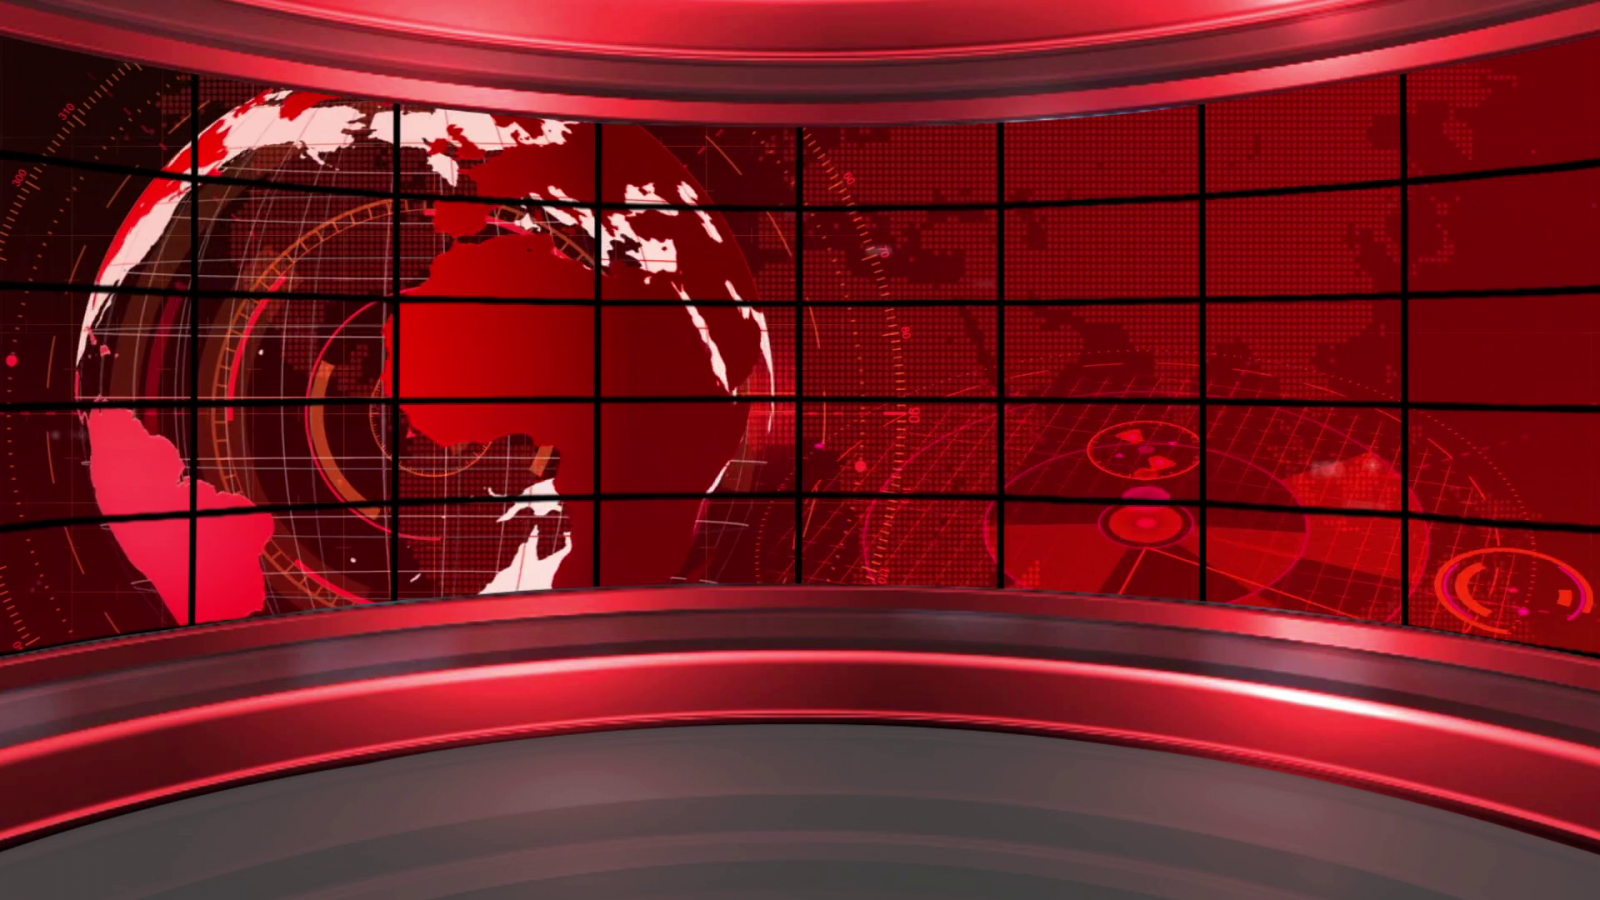 news anchor background